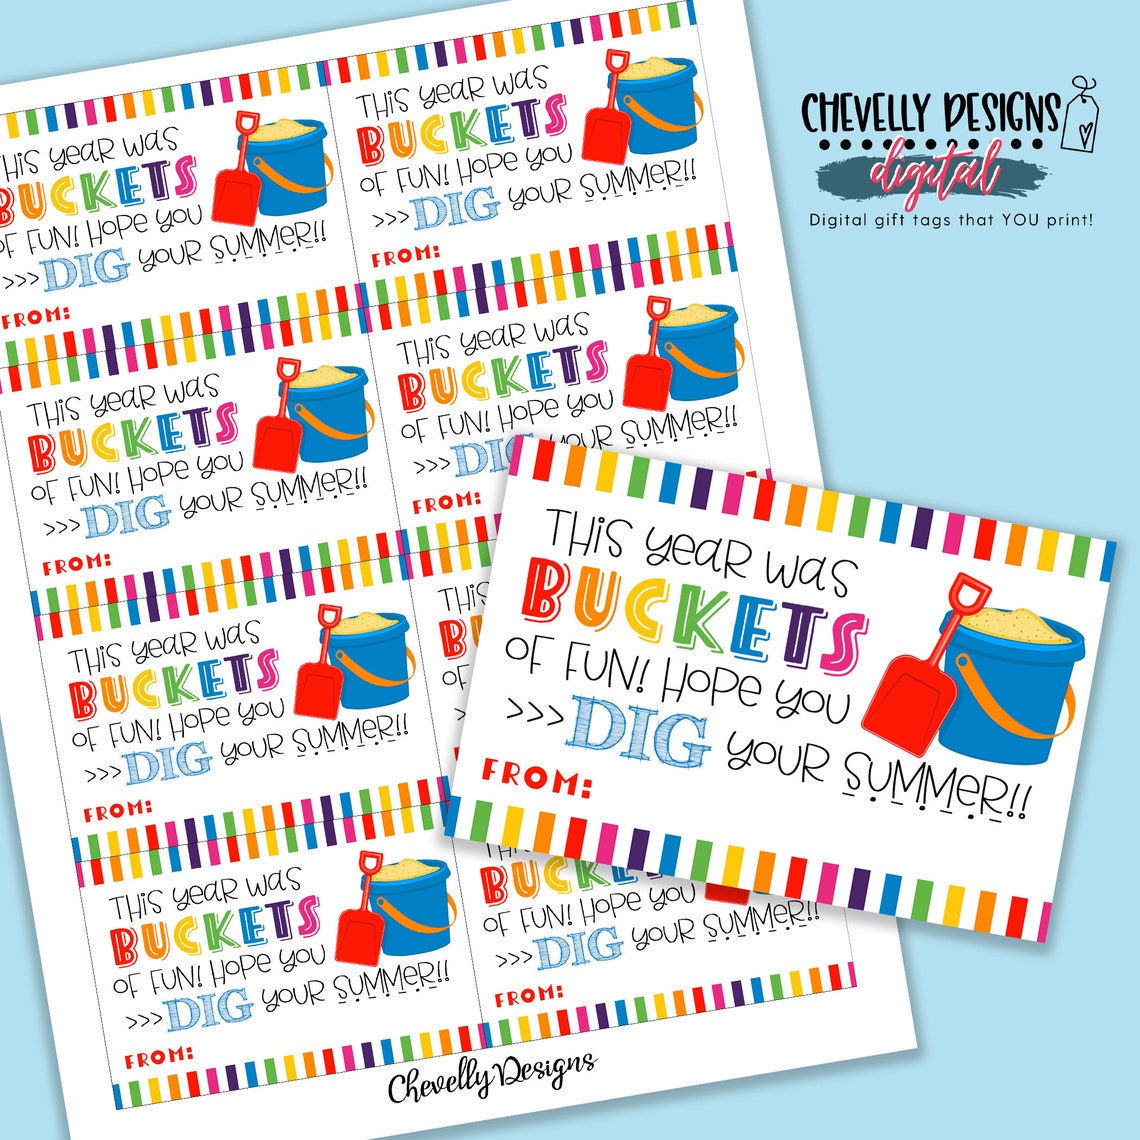 buckets-of-fun-gift-tags-printable-dgital-file-end-of-the-etsy-australia